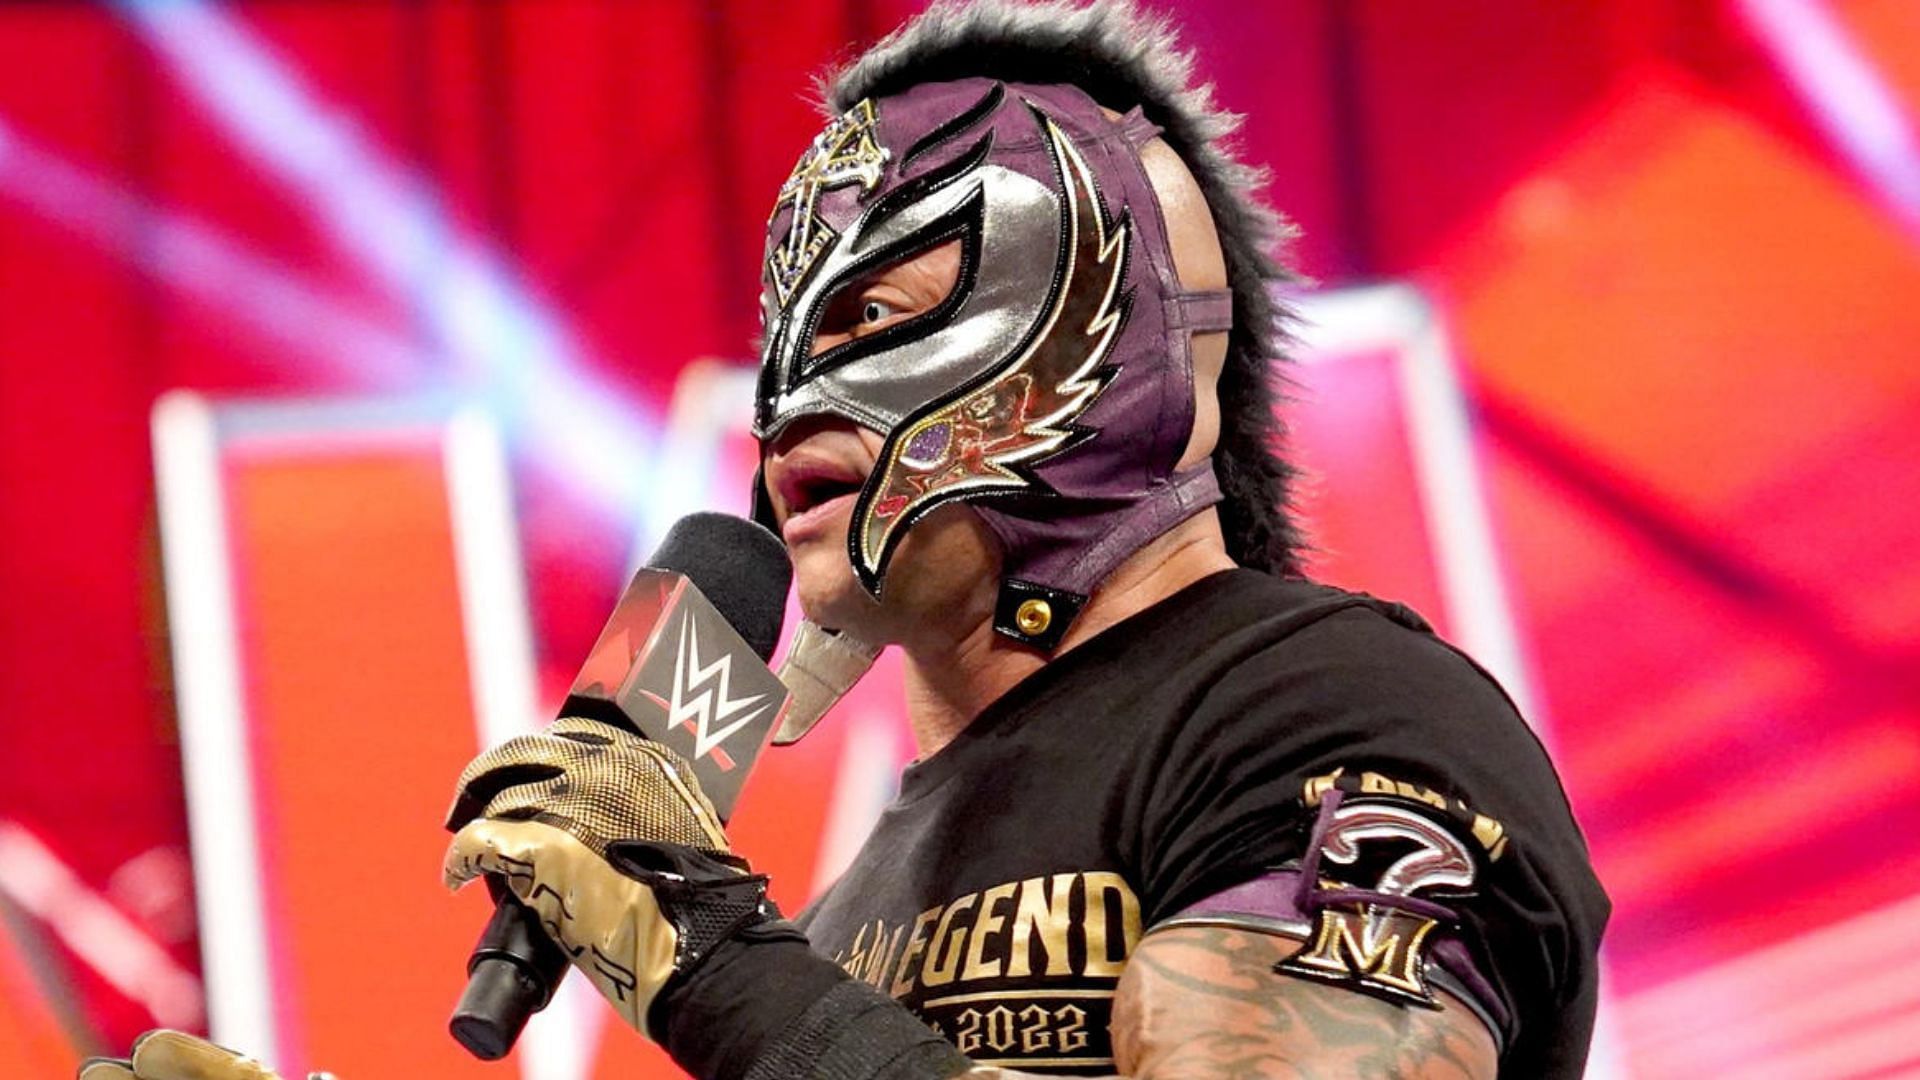 Rey Mysterio discloses how he